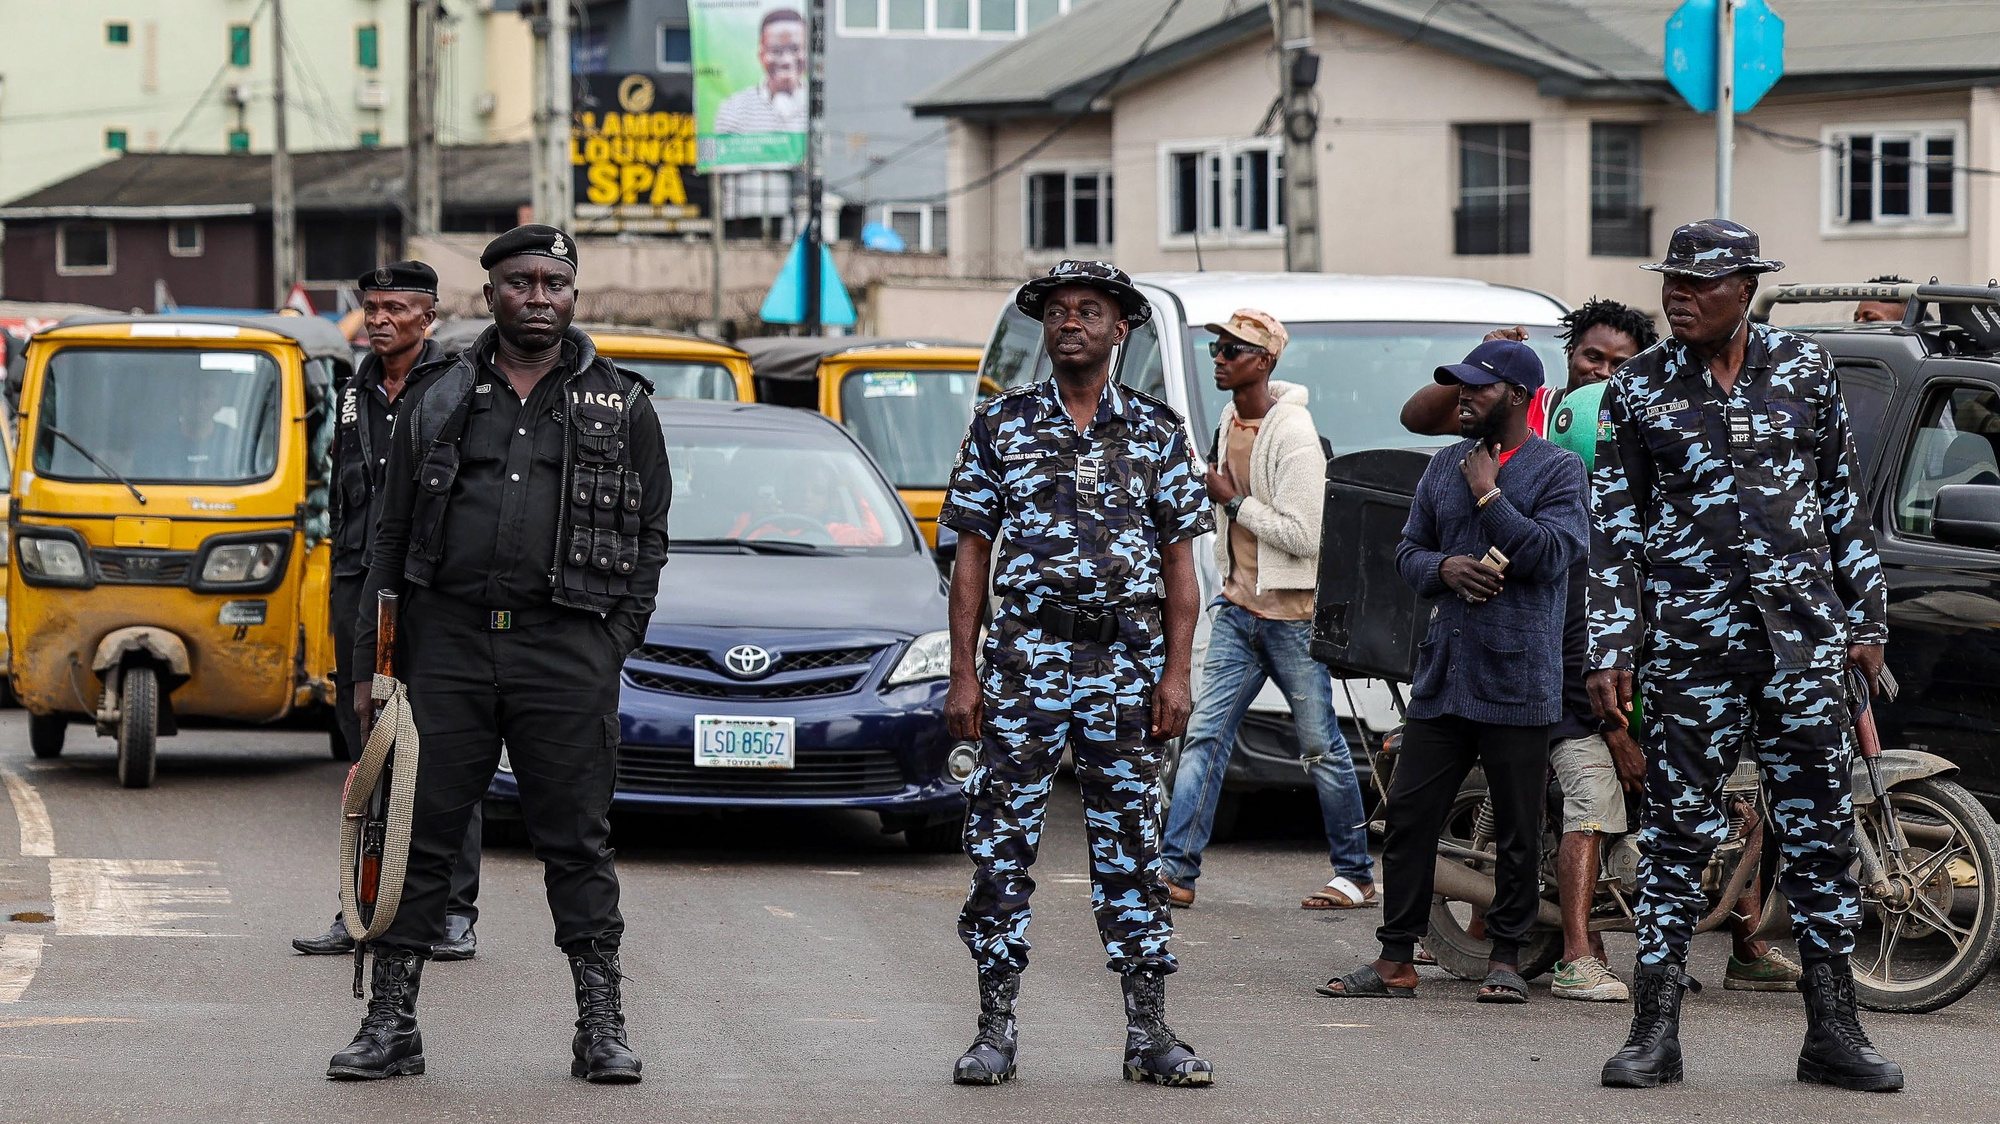 epa10780985 Security forces members stand guard during nationwide protests over the removal of fuel subsidies in Lagos, Nigeria, 02 August 2023. The popular fuel subsidies were removed last May by President Bola Tinubu citing budgetary concerns and reversely affected many low income people, leaving many unable to meet the costs of education, food and healthcare.  EPA/SAMUEL ALABI